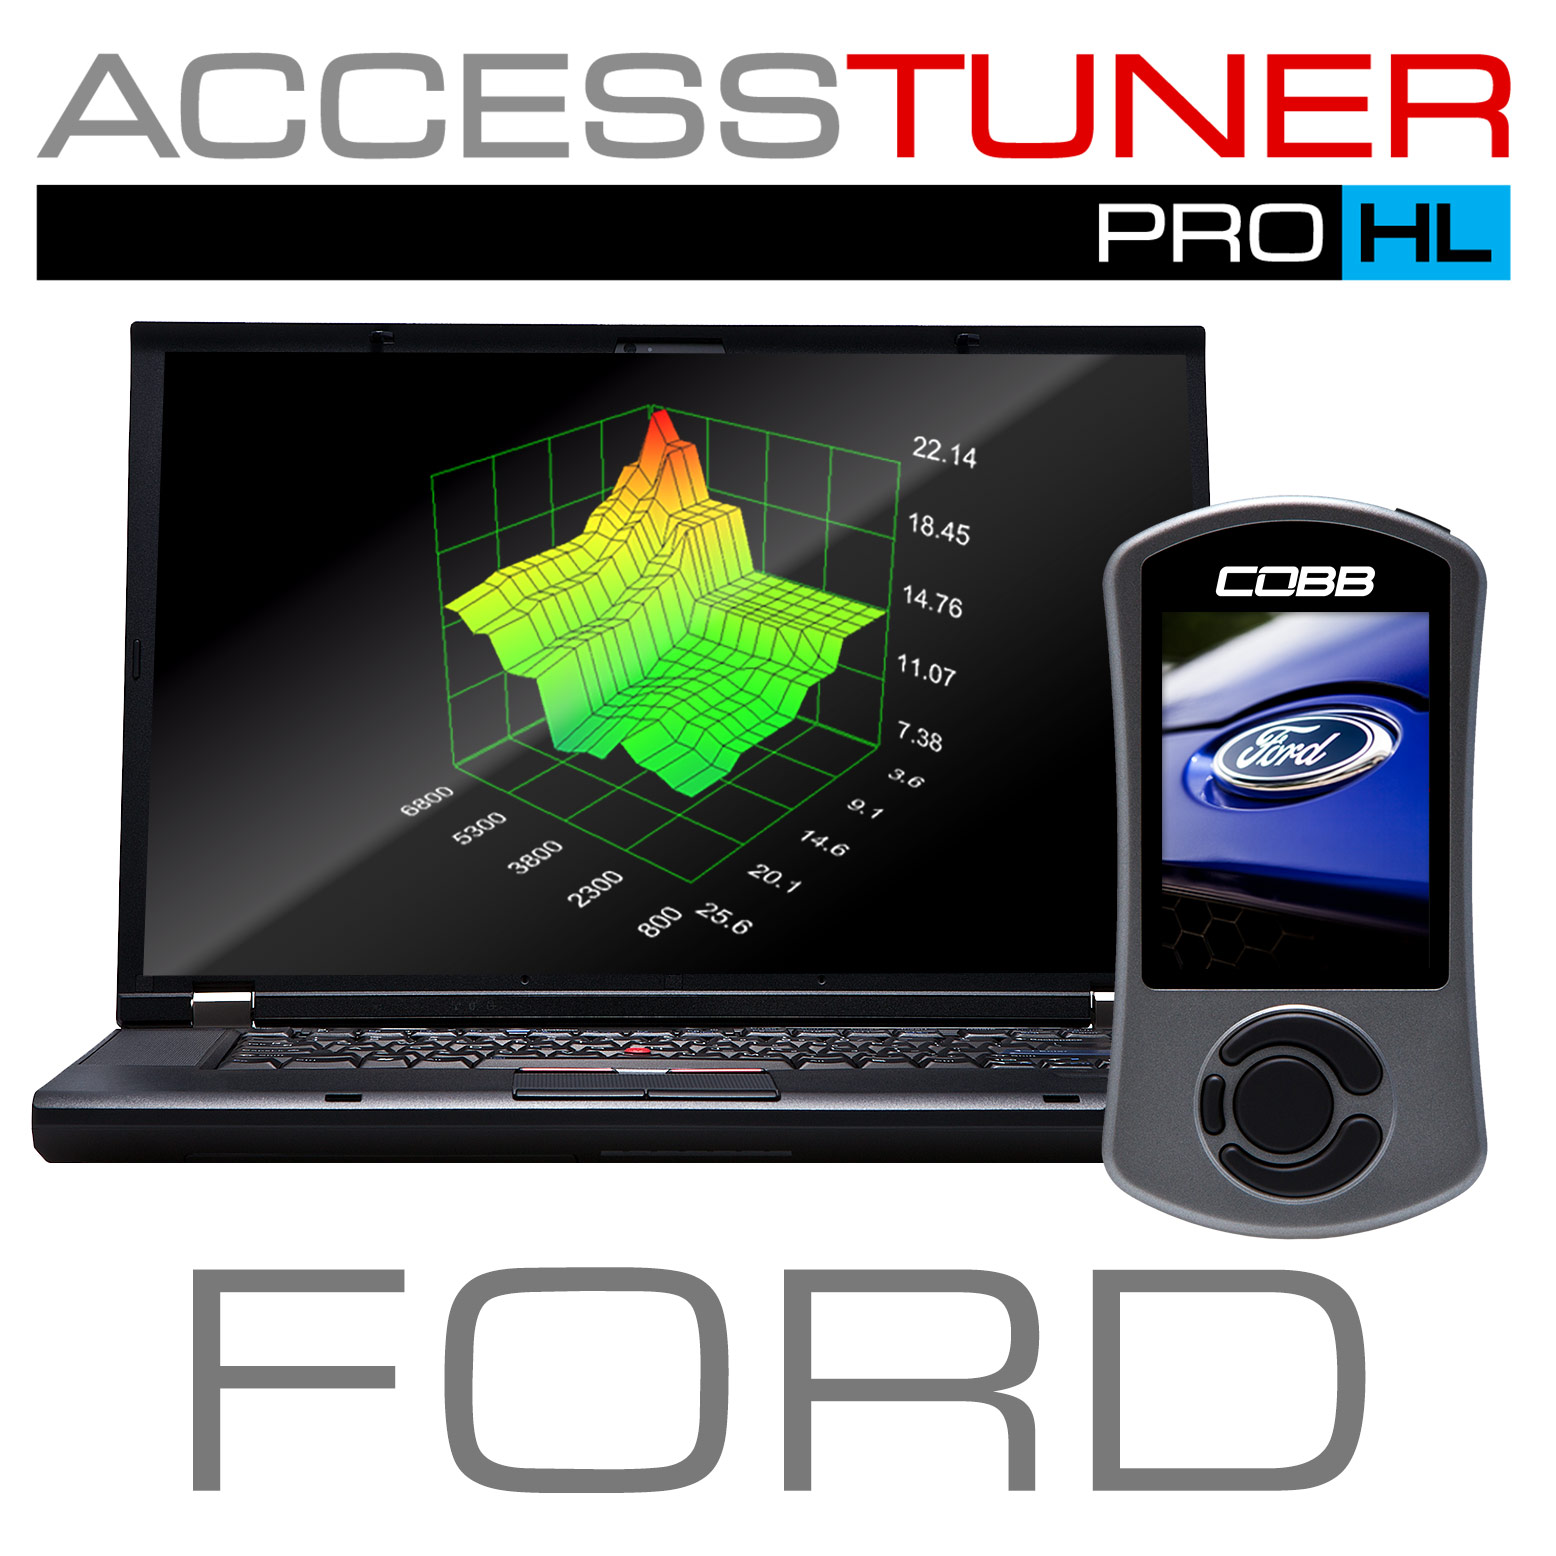 COBB Tuning Accesstuner Pro HL for Ford